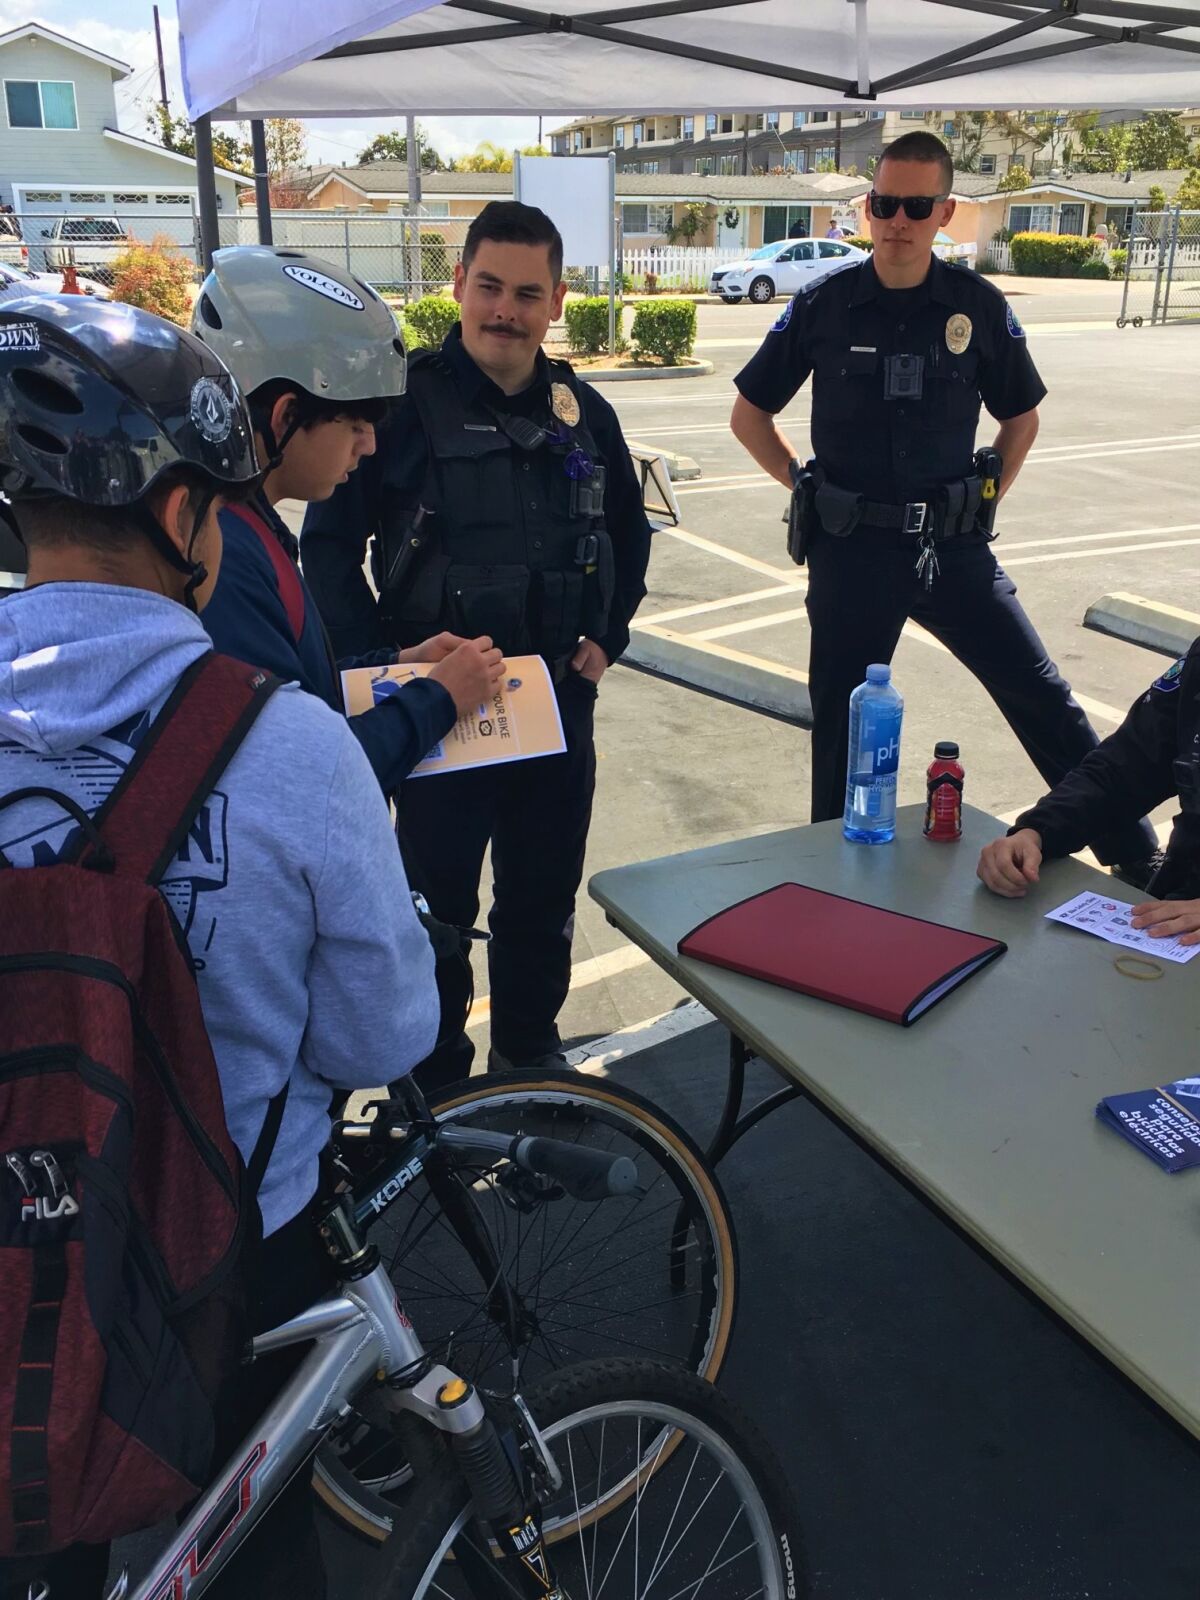 CMPD officers at a local bicycle safety event Saturday helped residents register their bikes online through Project 529.